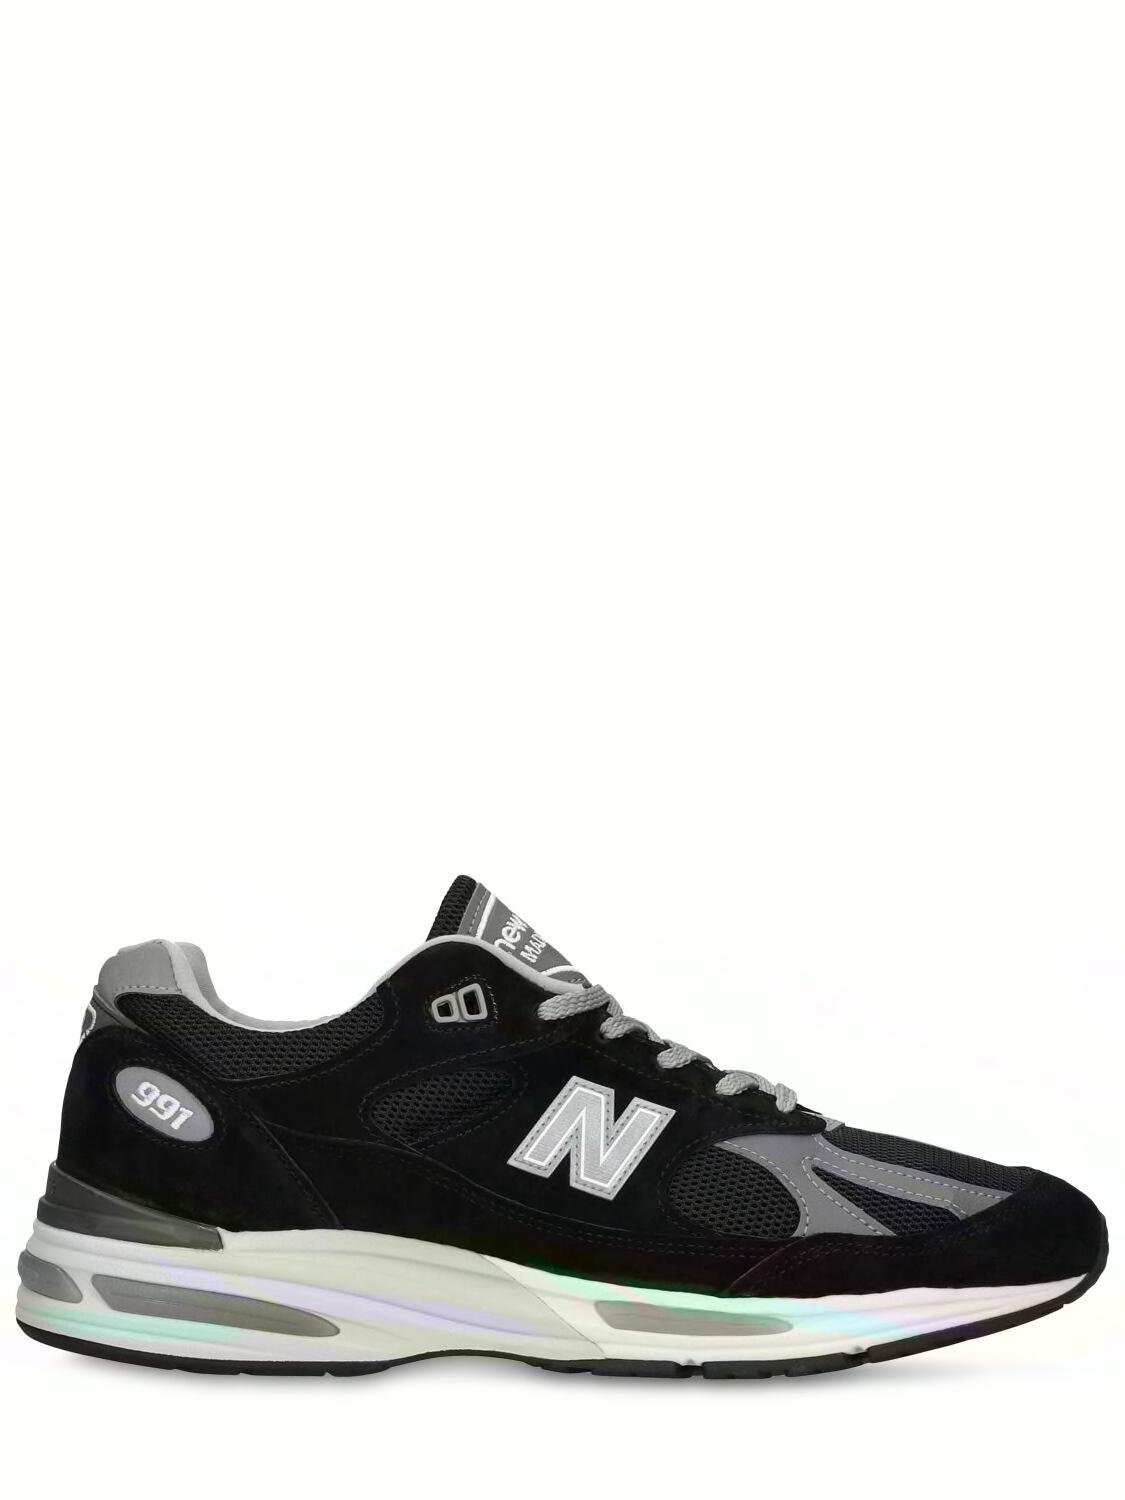 991 V2 Sneakers by NEW BALANCE